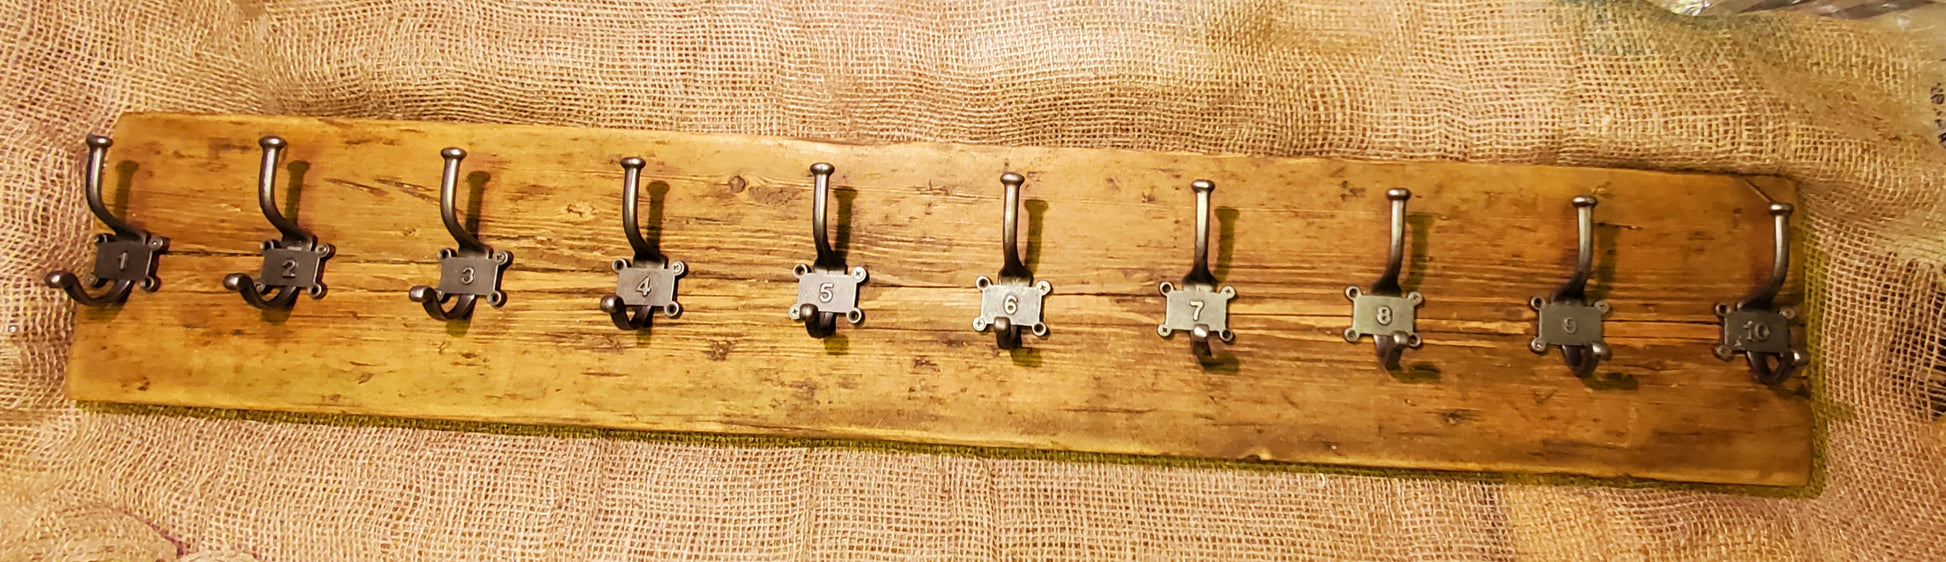 Retro Vintage Numbered 1- 10 Hat & Coat Hook Set - Spearhead Collection - Hat and Coat Hooks - Hardware, Hat and Coat Hooks, Numbered Hooks